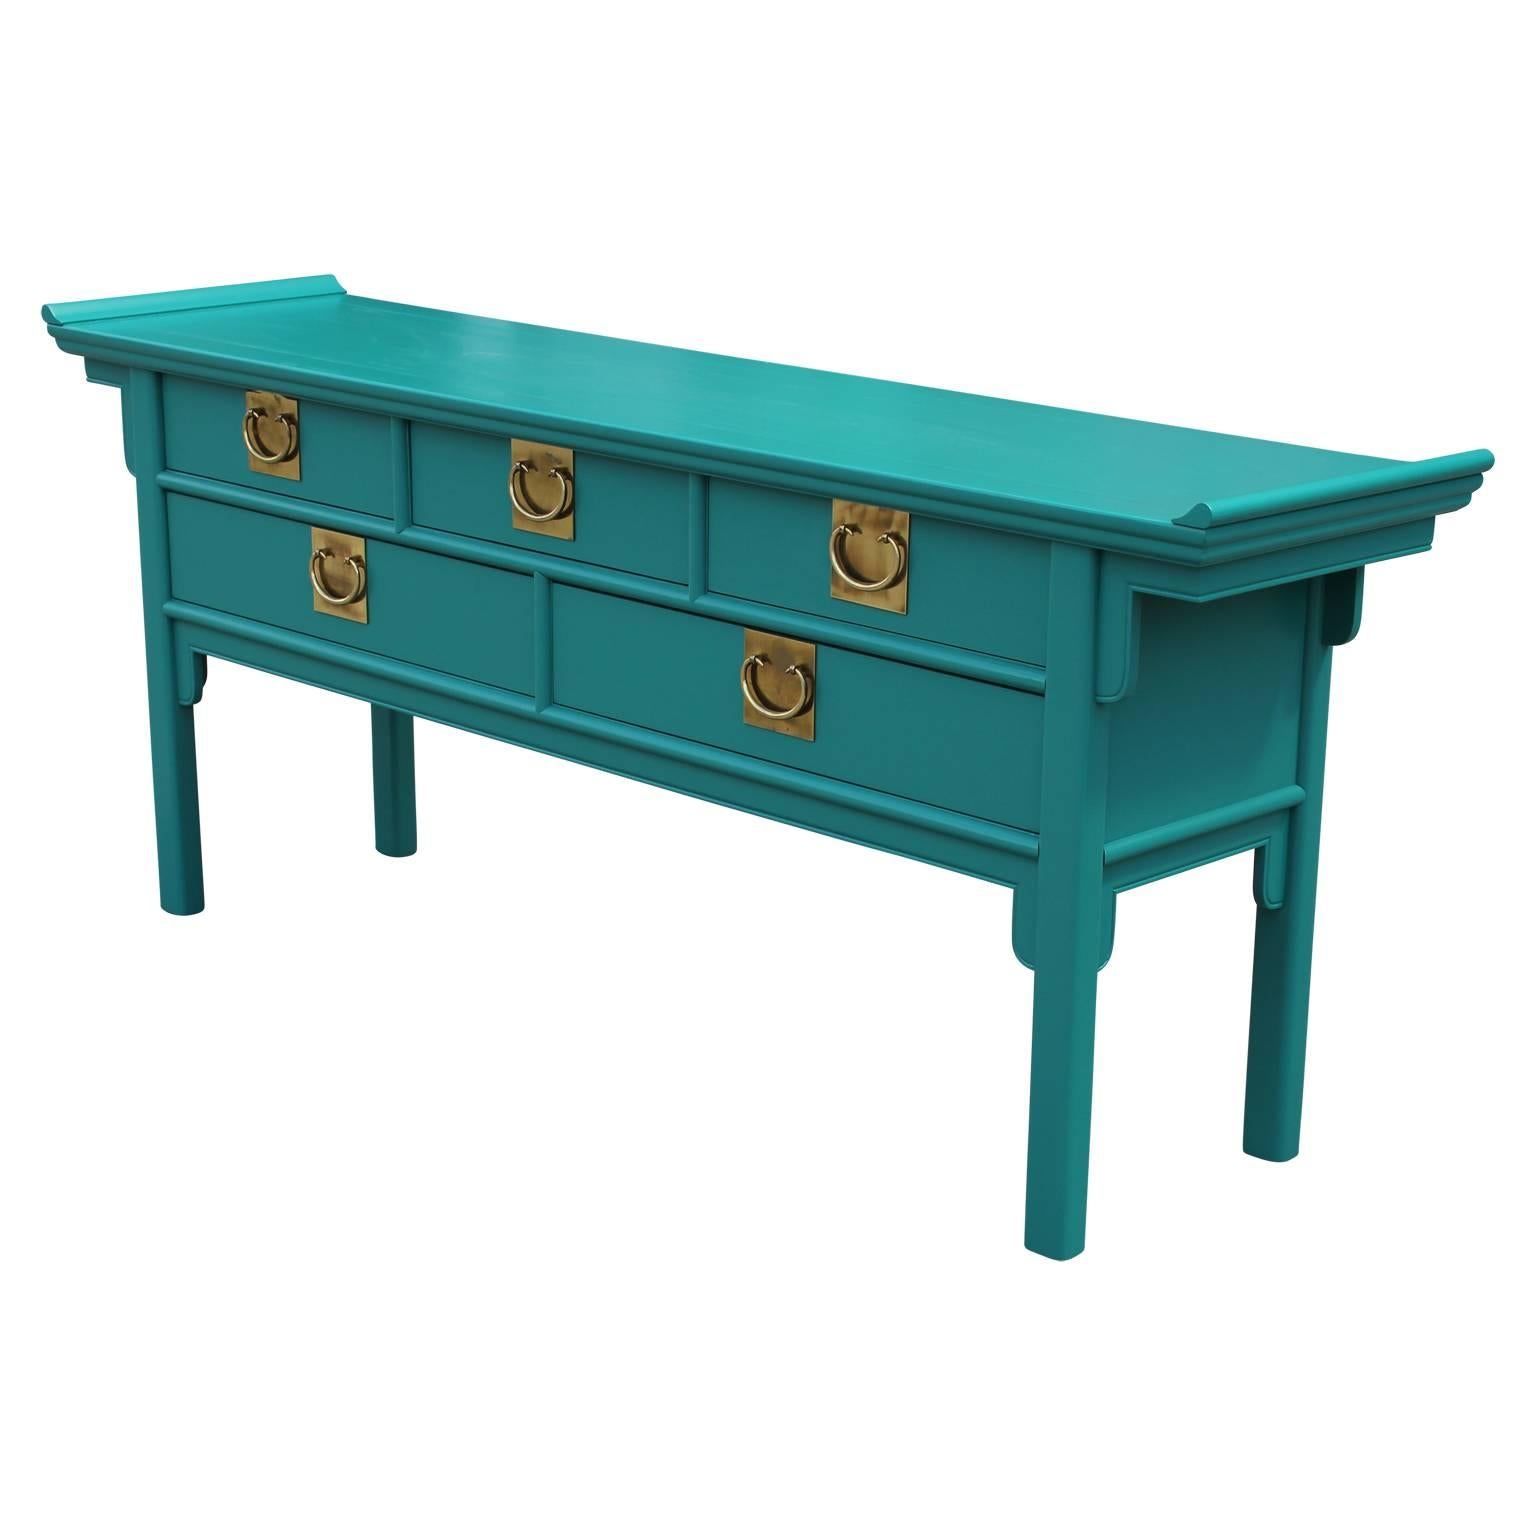 Modern century furniture  five-drawer console table or dresser recently refinished in a nice teal / turquoise with brass hardware.